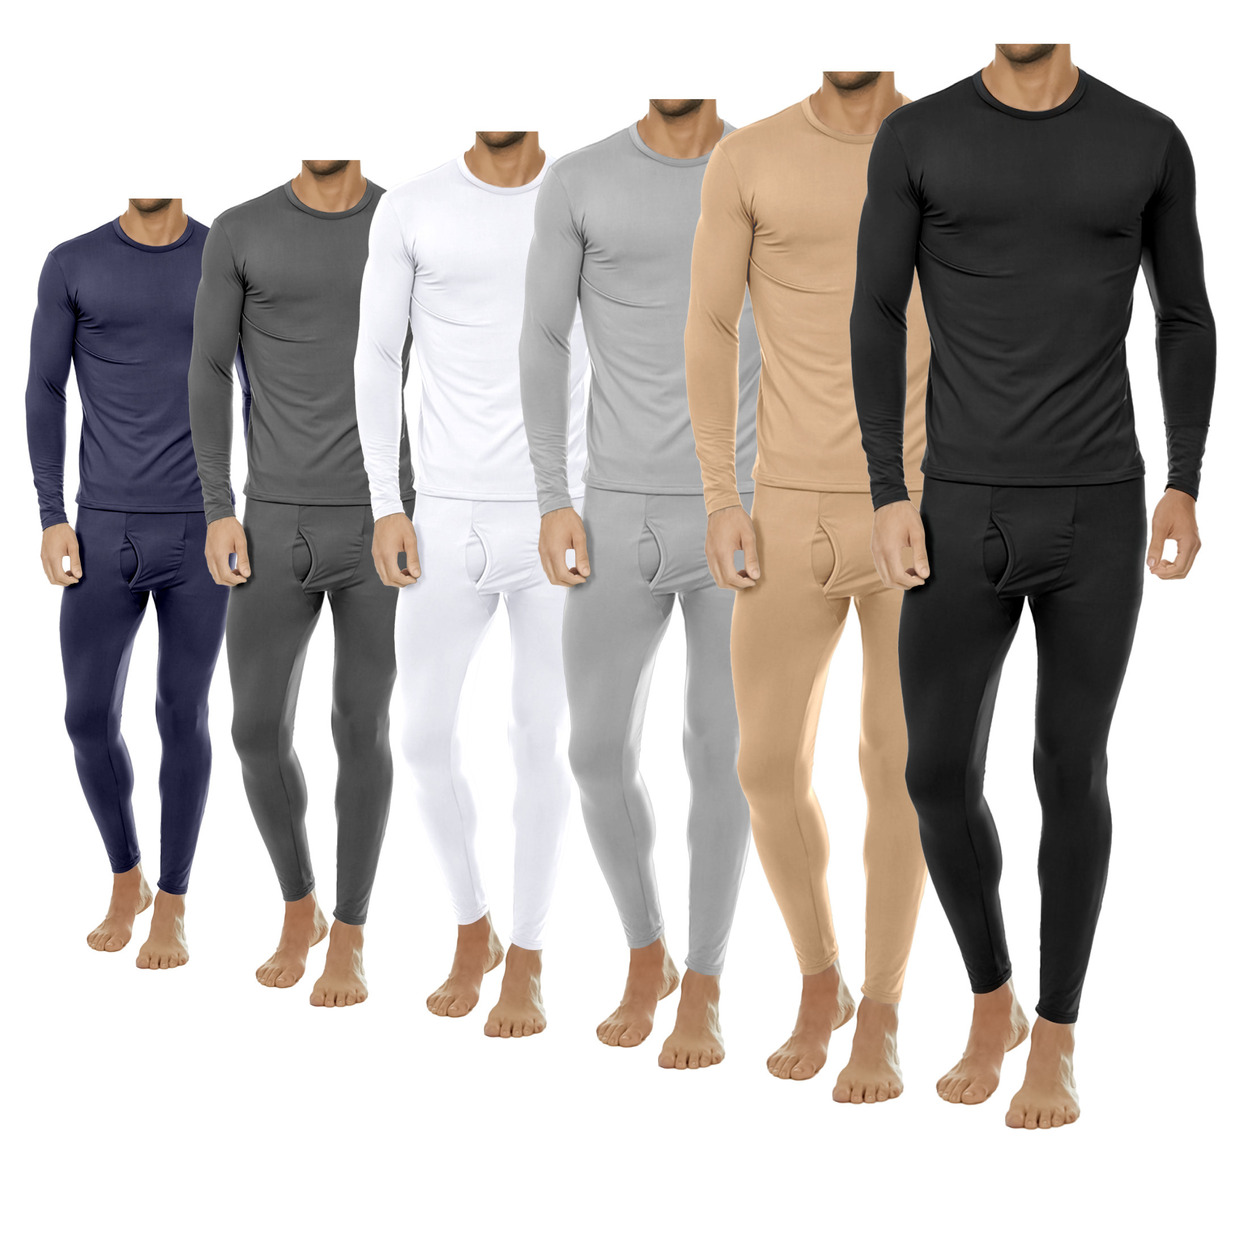 2-Pieces: Men's Winter Warm Fleece Lined Thermal Underwear Set For Cold Weather - Tan, Medium